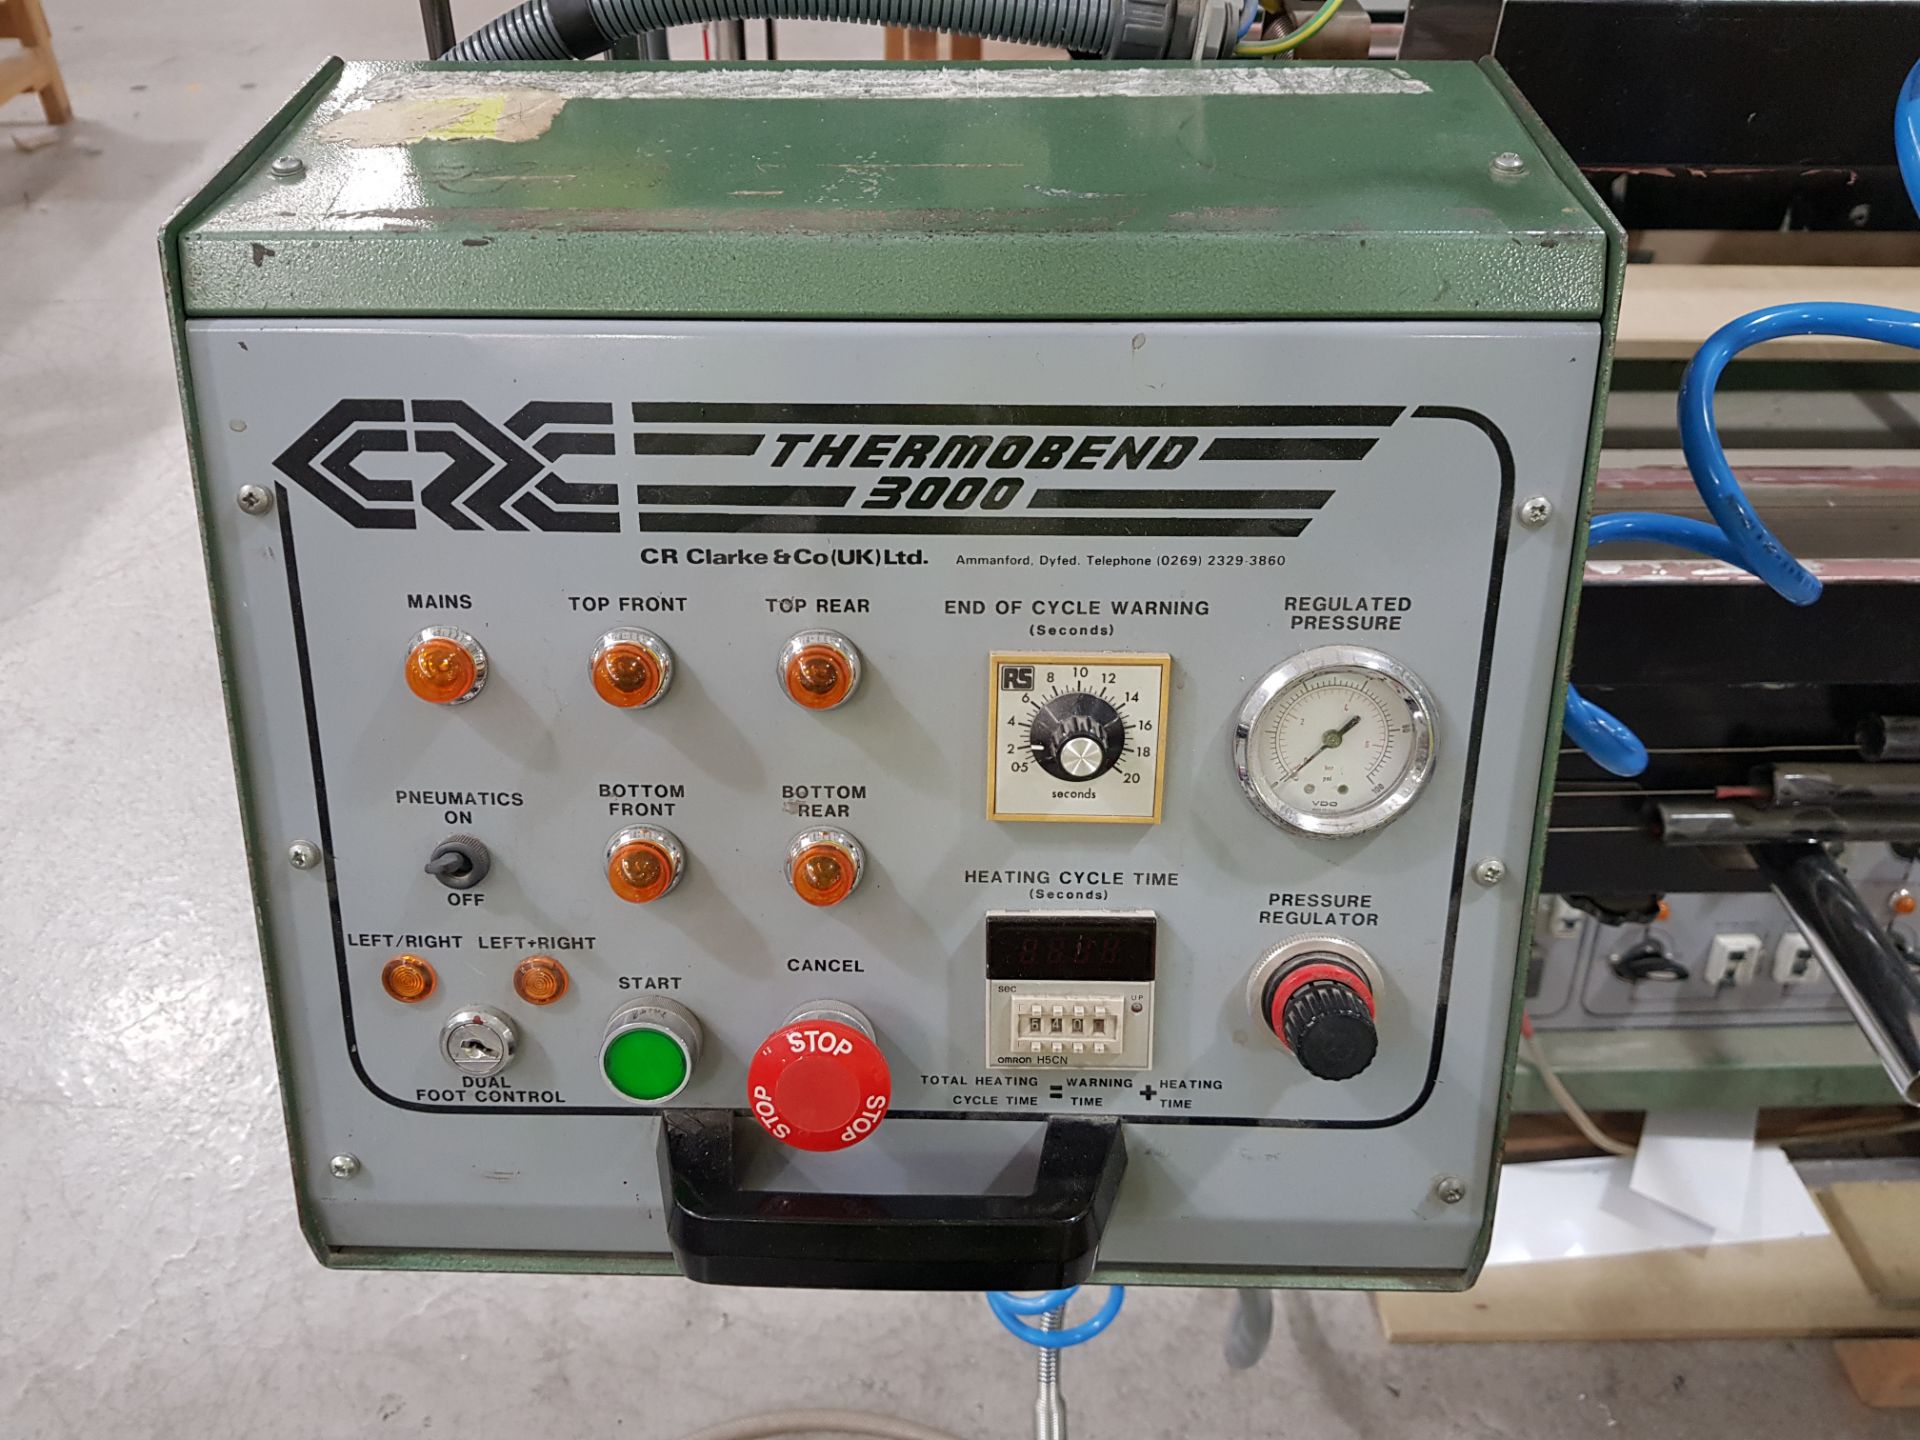 THERMOBEND 3000 WIRE STRIP HEATER - CR CLARKE - SN 300007 - 240 V - MODEL - 3000 D - Image 5 of 7